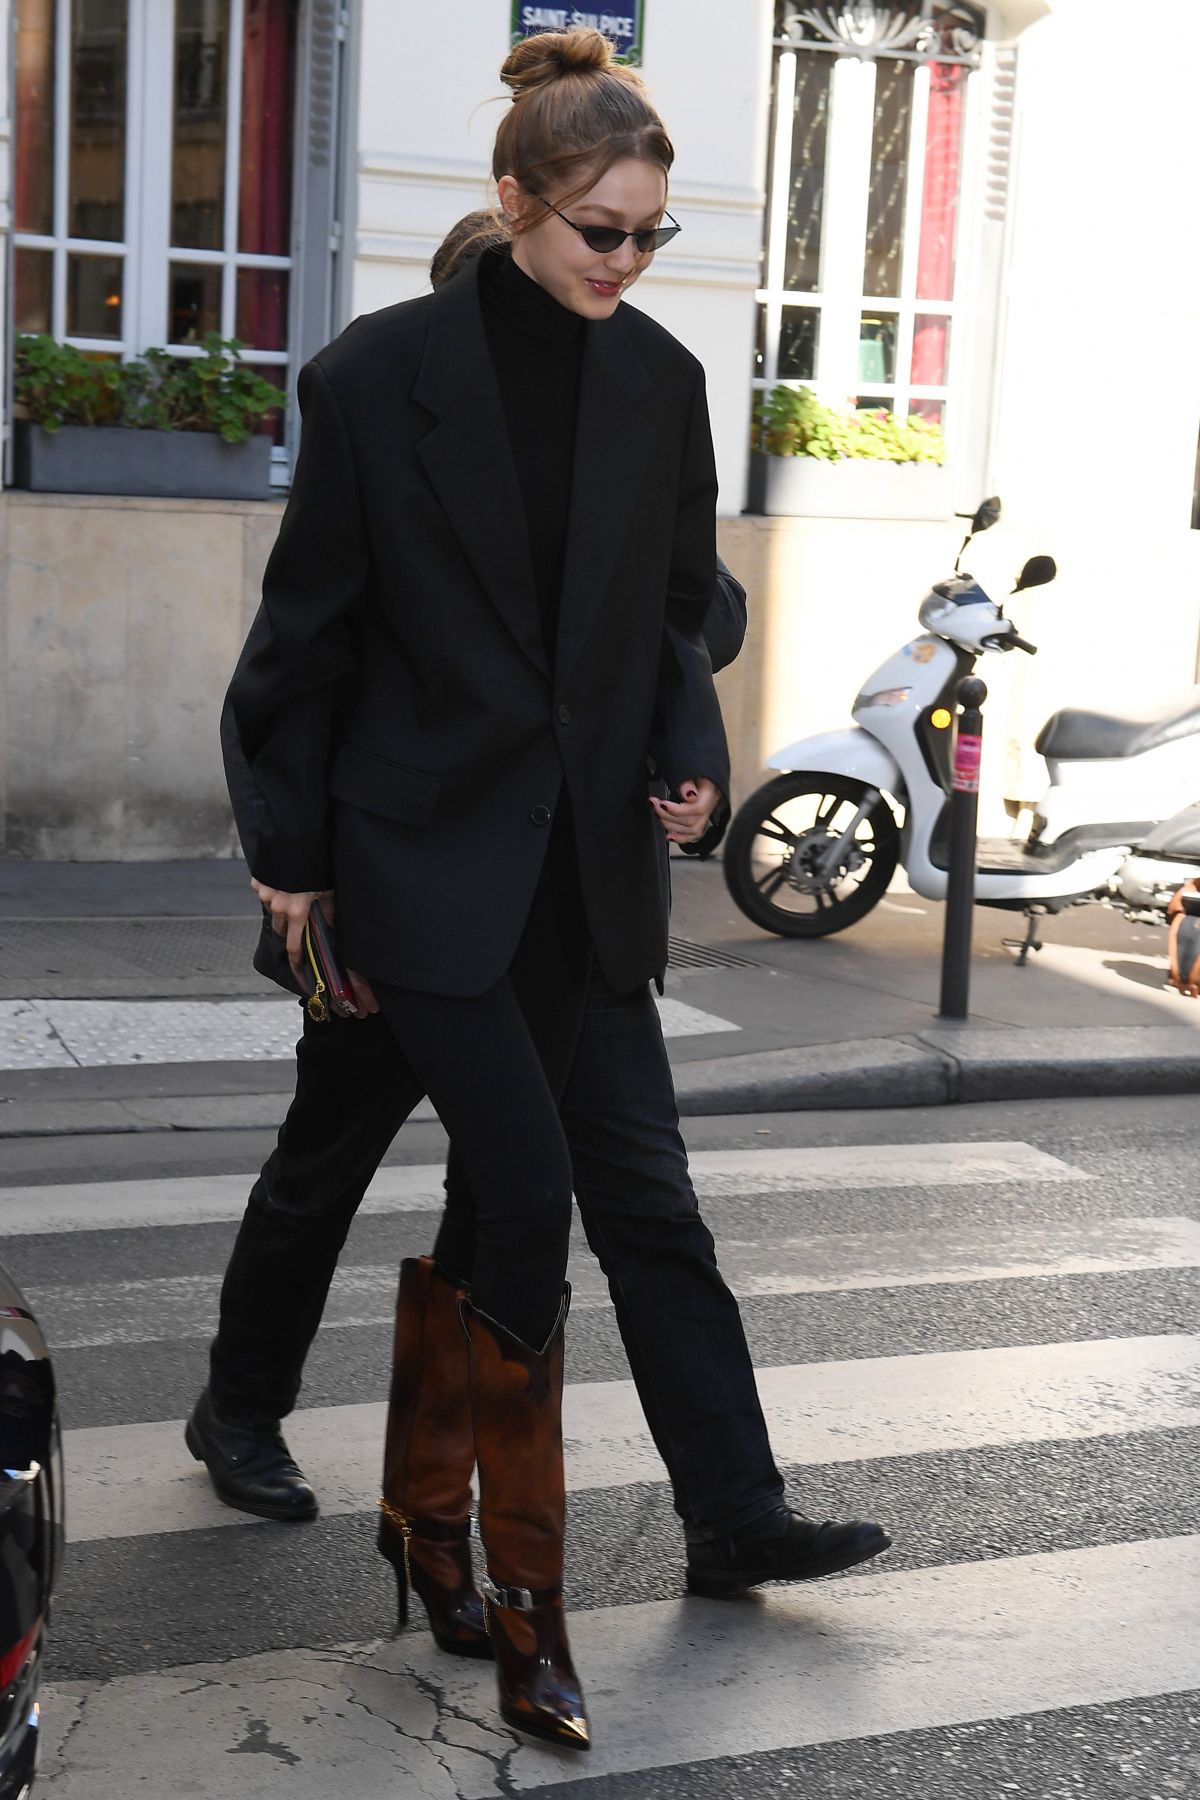 gigi-hadid-out-and-about-in-paris-02-26-2019-1.jpg